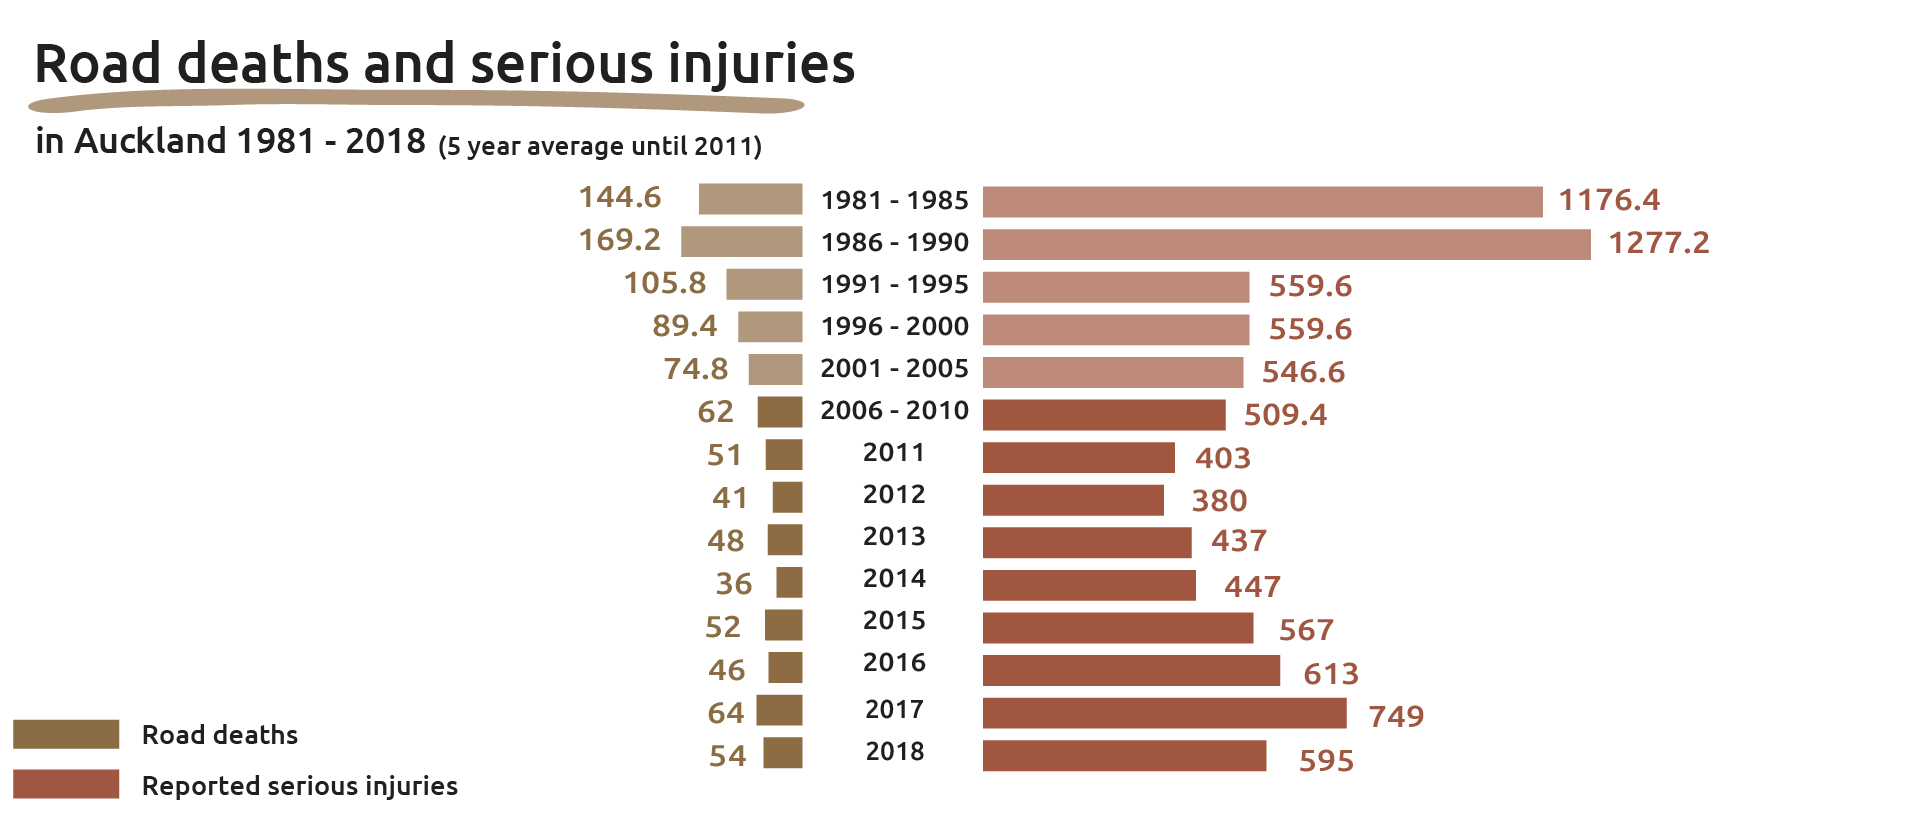 Road deaths and serious injuries. Both of these statistics generally declined between 1981 and 2012. They have then generally grown again, though not as rapidly.